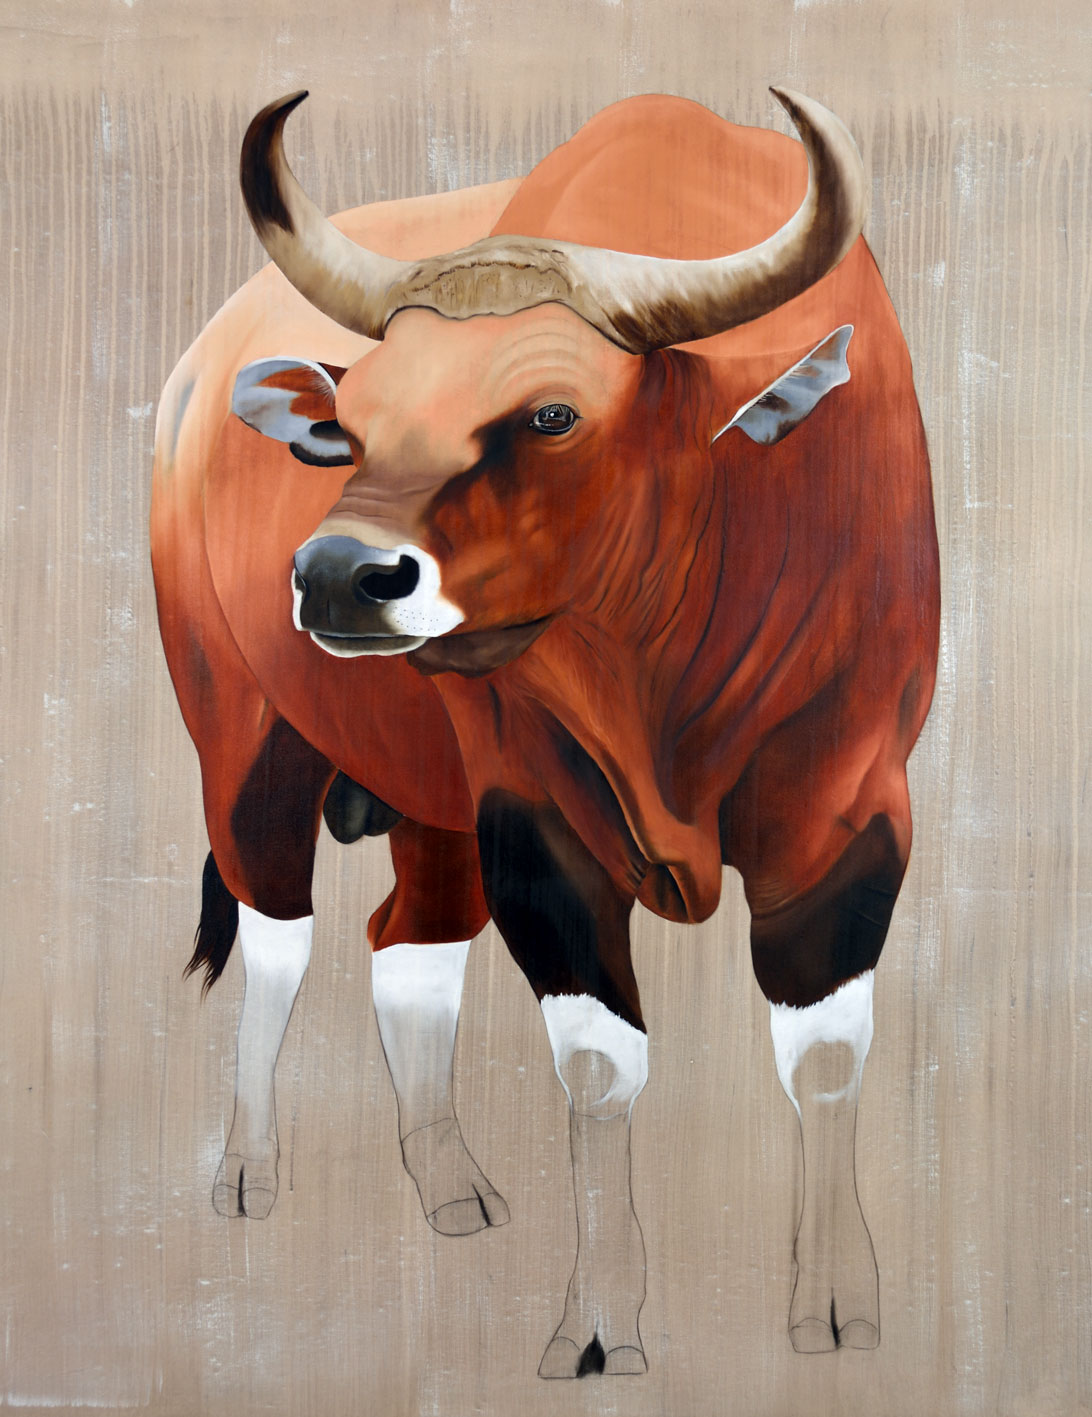 MAIRIE DE MONACO banteng-bos-javanicus-asian-red-bull-threatened-endangered-extinction Thierry Bisch Contemporary painter animals painting art  nature biodiversity conservation 